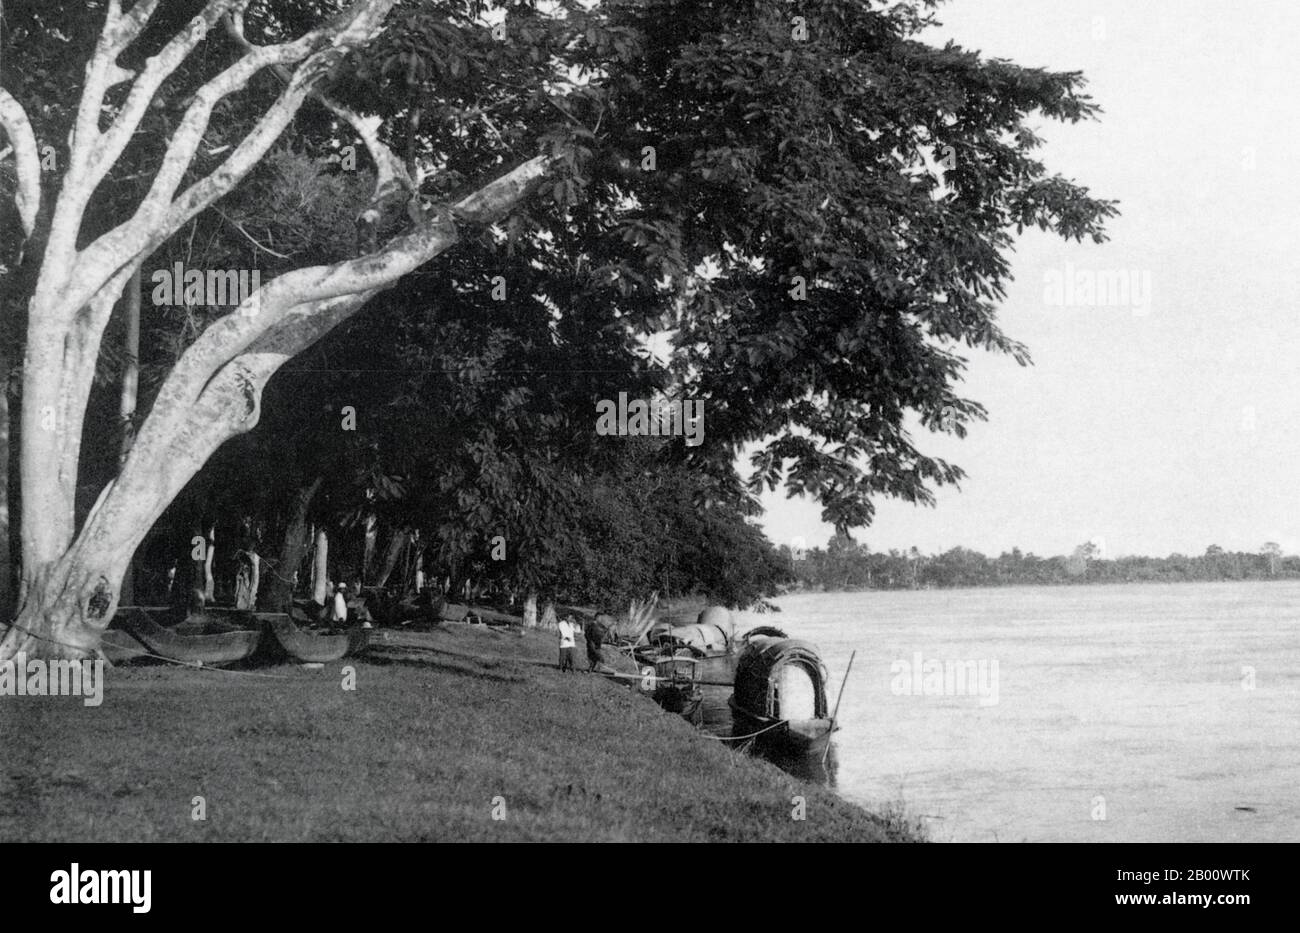 Laos: A barge moored by the riverbank in Vientiane in 1901.  Vientiane, formerly Sri Sattanak, was razed to the ground and looted by Siamese armies in 1827. The city was left in grave disrepair and became overgrown and nearly unpopulated until the French colonists arrived and took over the region in 1893. Vientiane became the capital of the French protectorate of Laos in 1899 and was rebuilt with renovated Buddhist temples surrounded by French architecture. Vientiane remained the ‘chef-lieu’- the district capital – of French Laos until 1949. Stock Photo